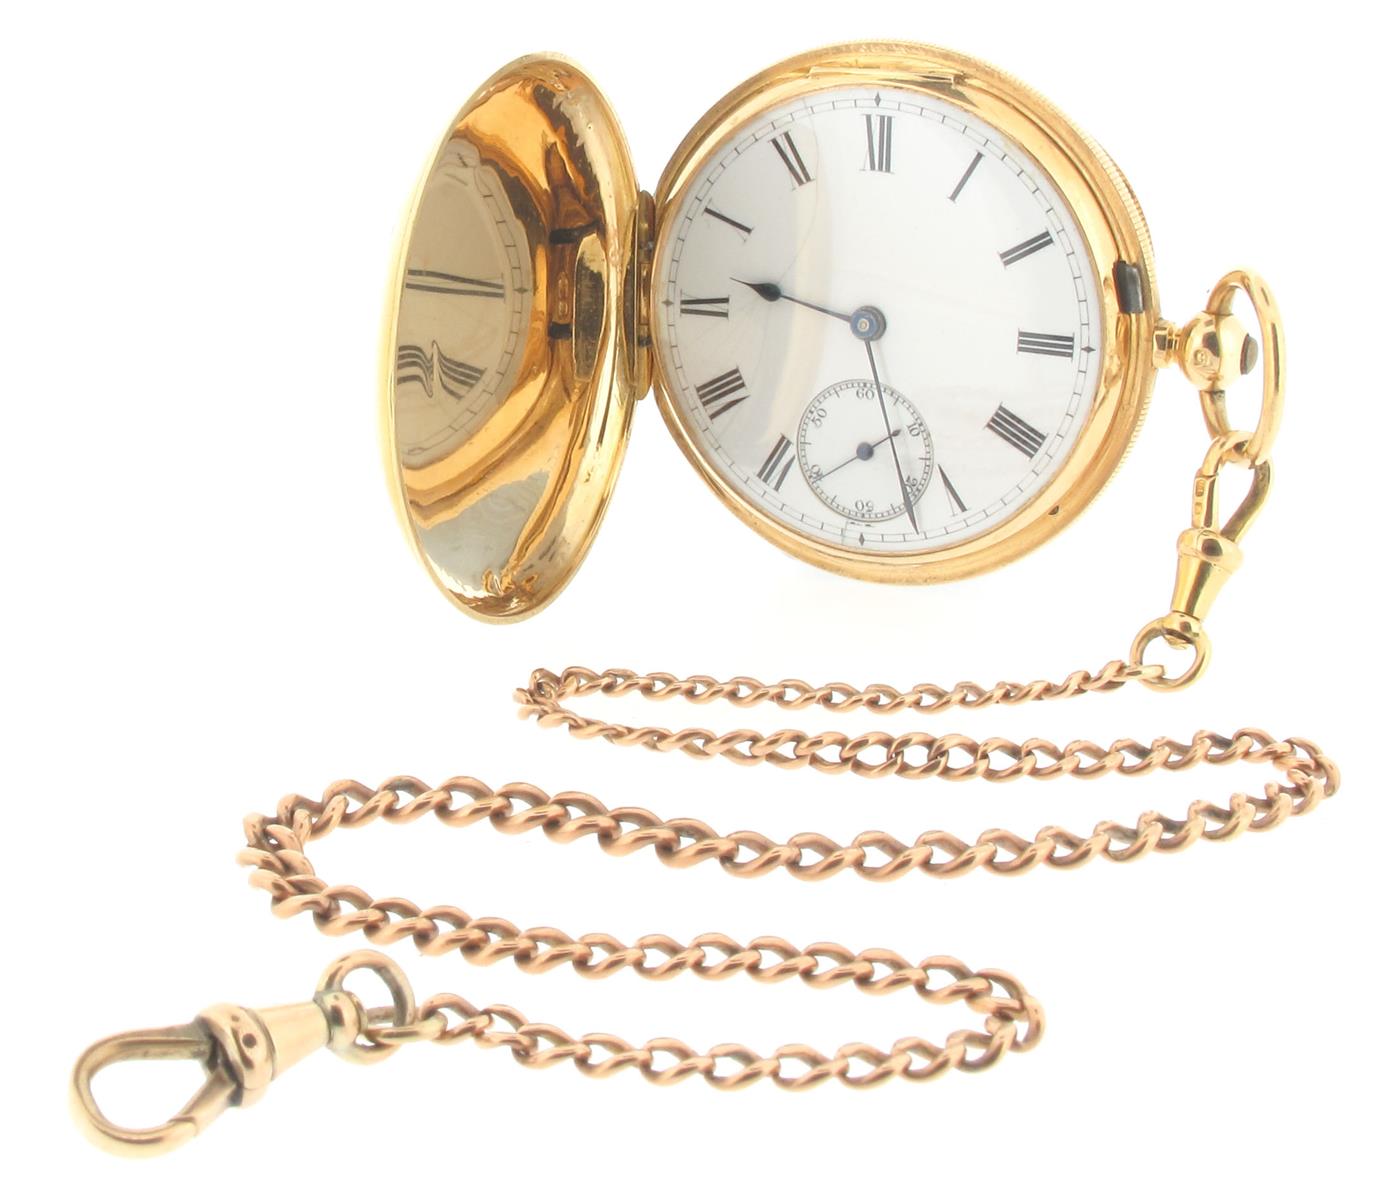 An 18ct yellow gold hunting cased pocket watch, white enamel dial with black Roman numerals and